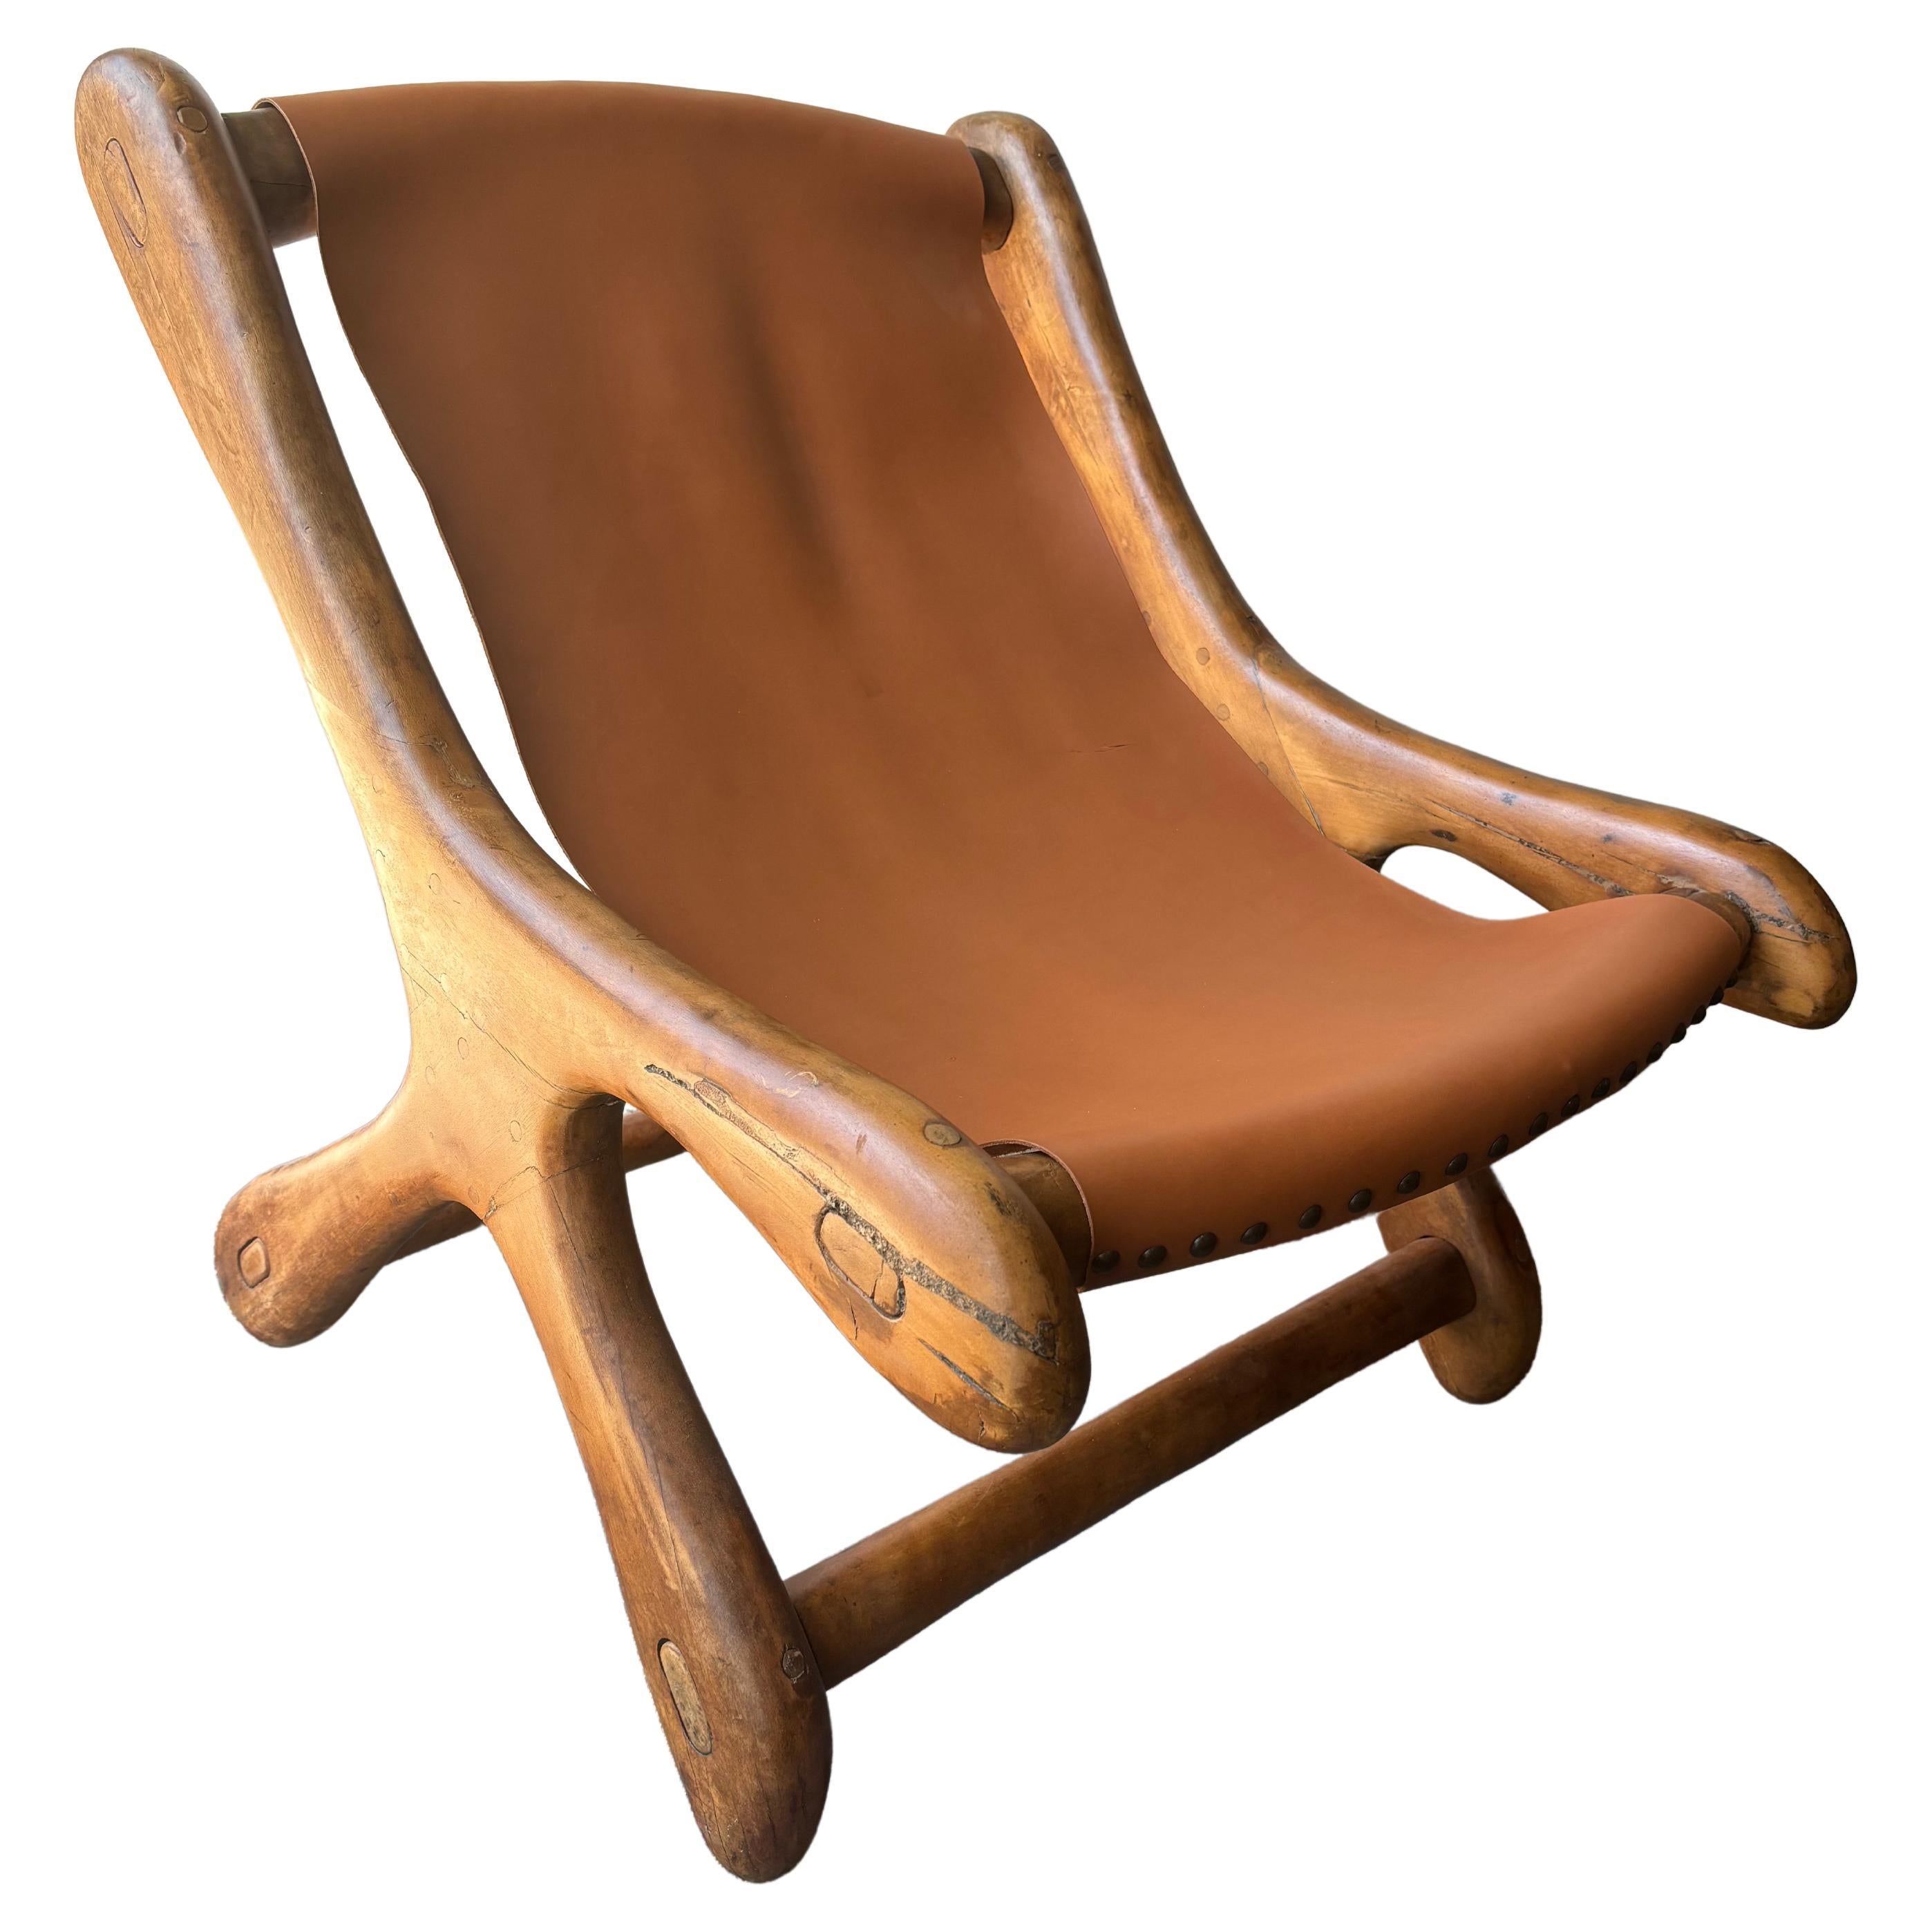 Don Shoemaker sling leather lounge chair .